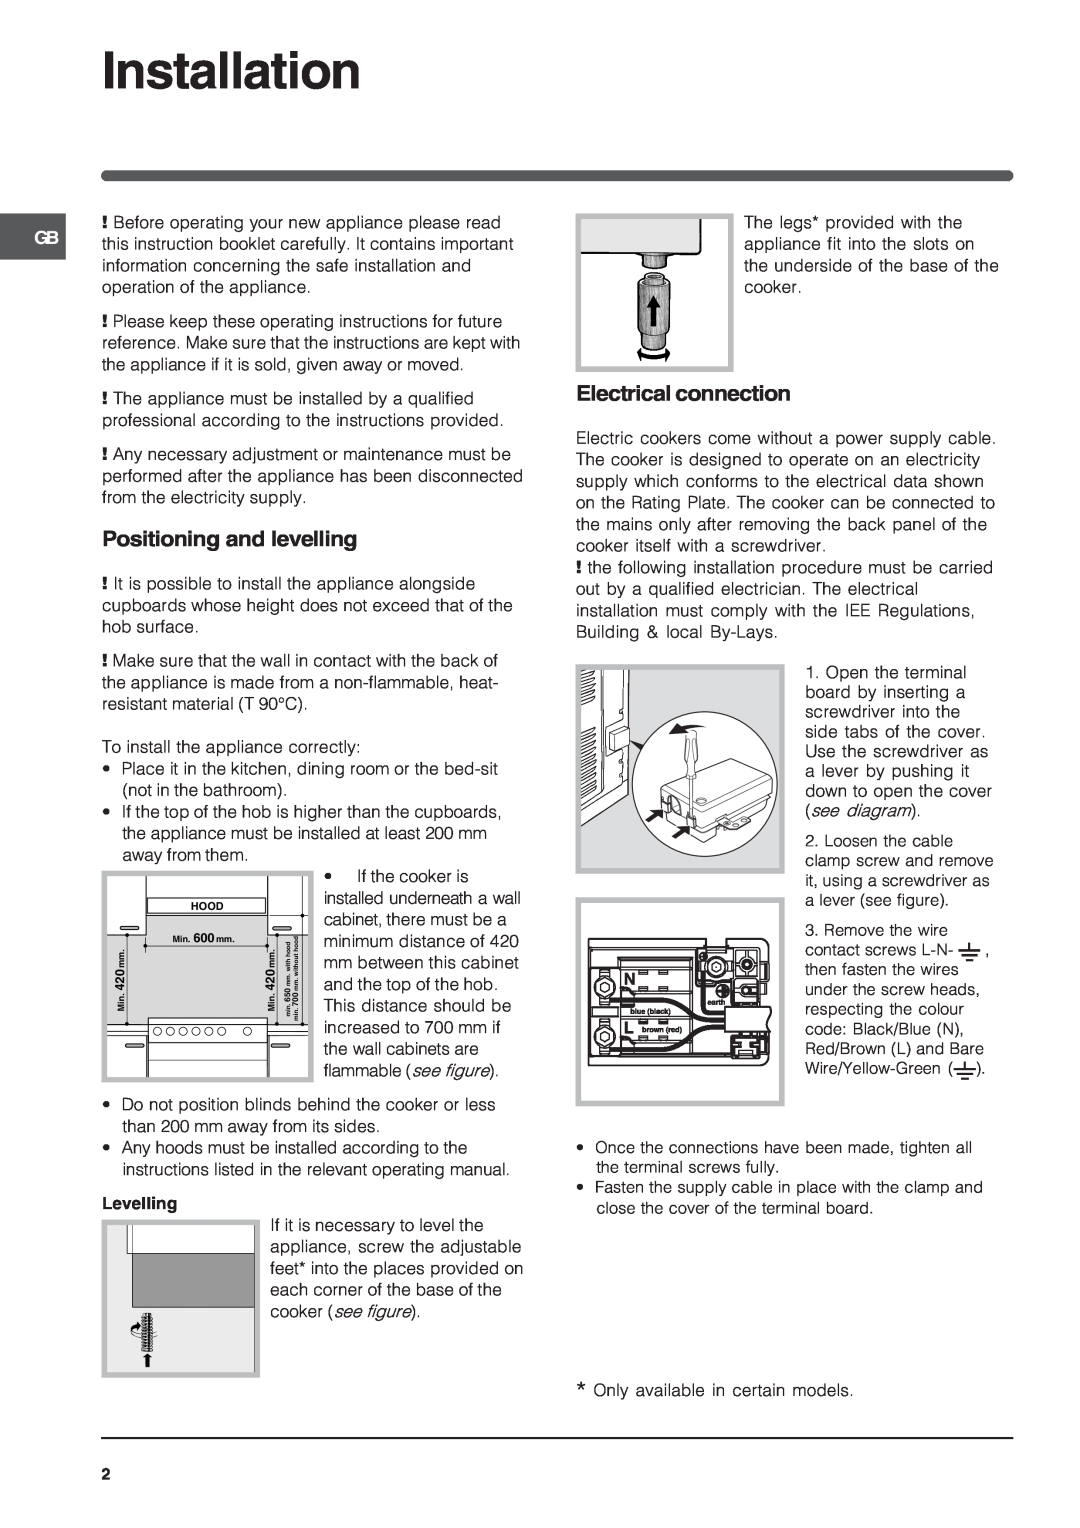 Indesit K6C32/G operating instructions Installation, Positioning and levelling, Electrical connection 